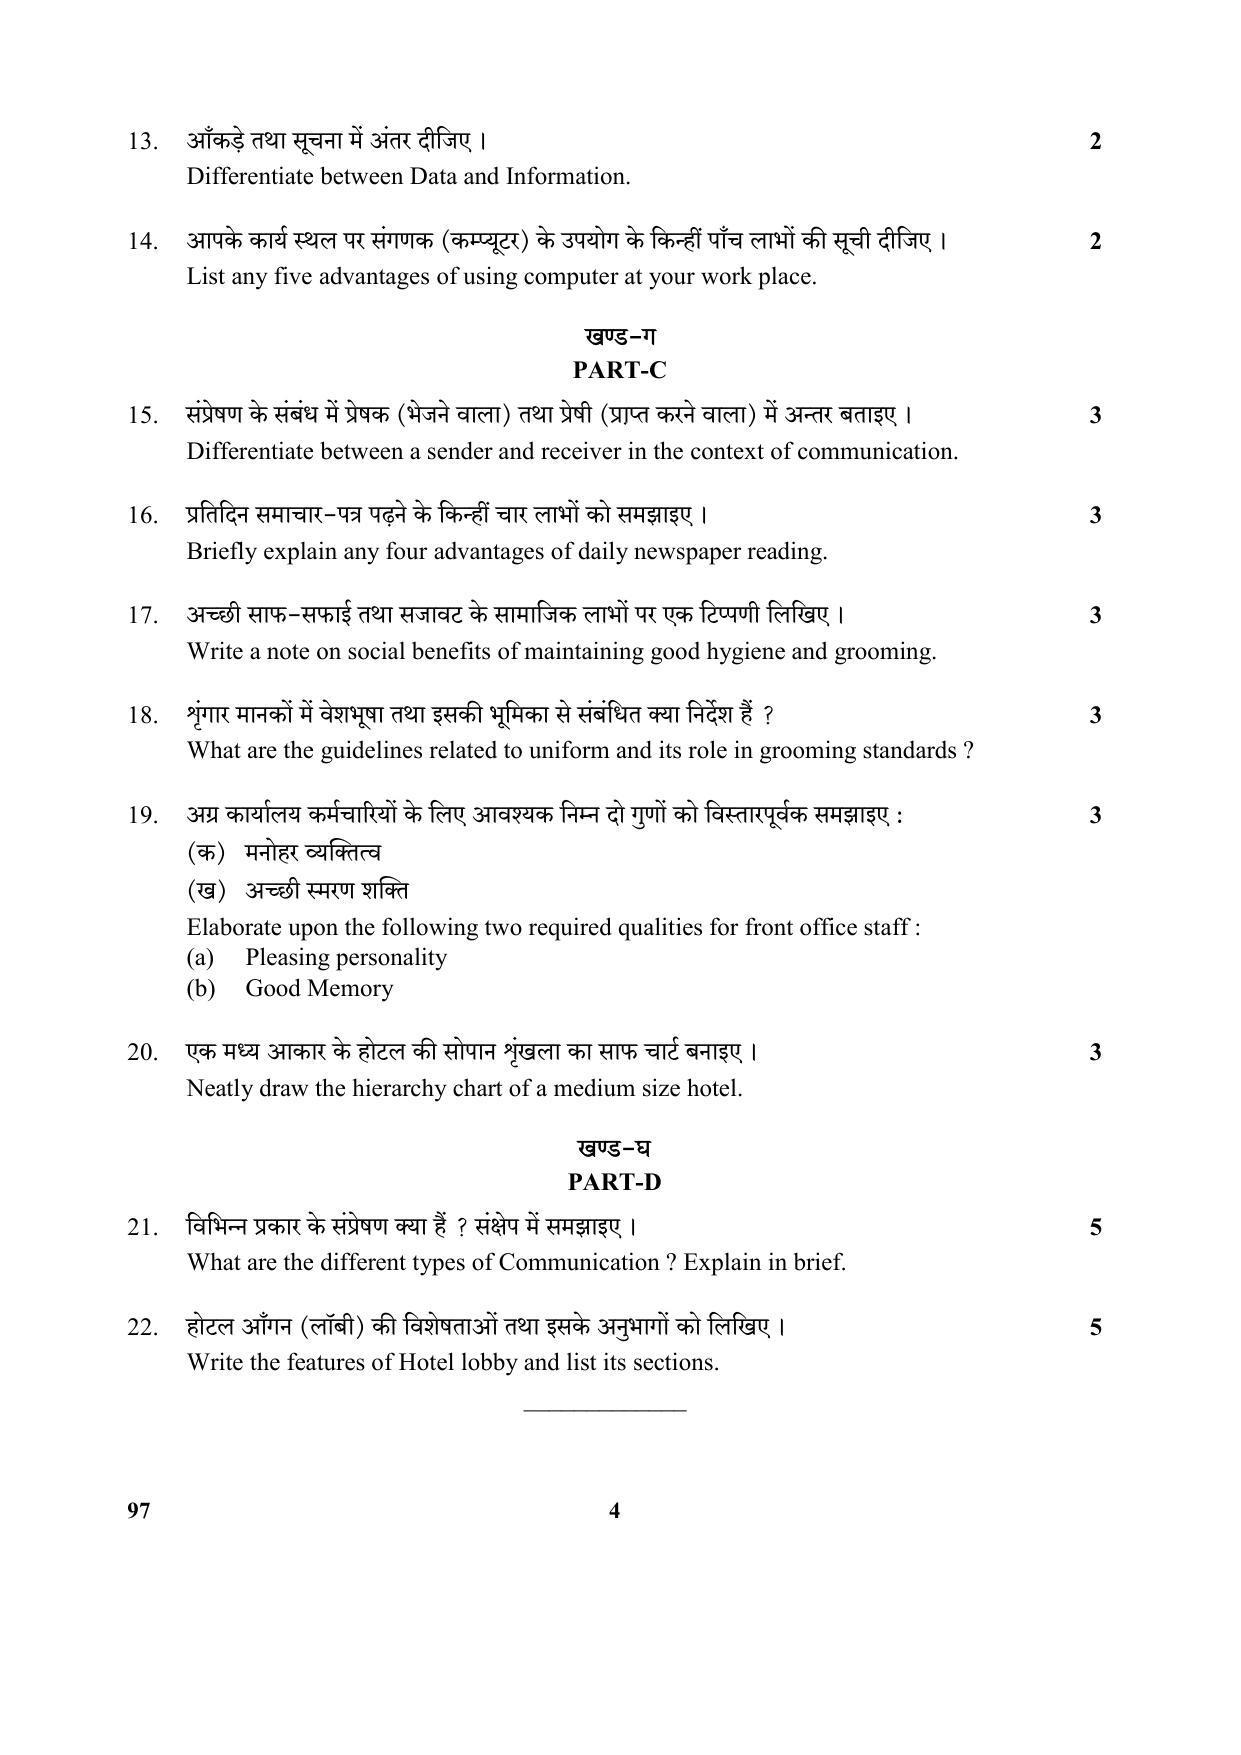 CBSE Class 10 97 (Front Office Operations) 2018 Question Paper - Page 4